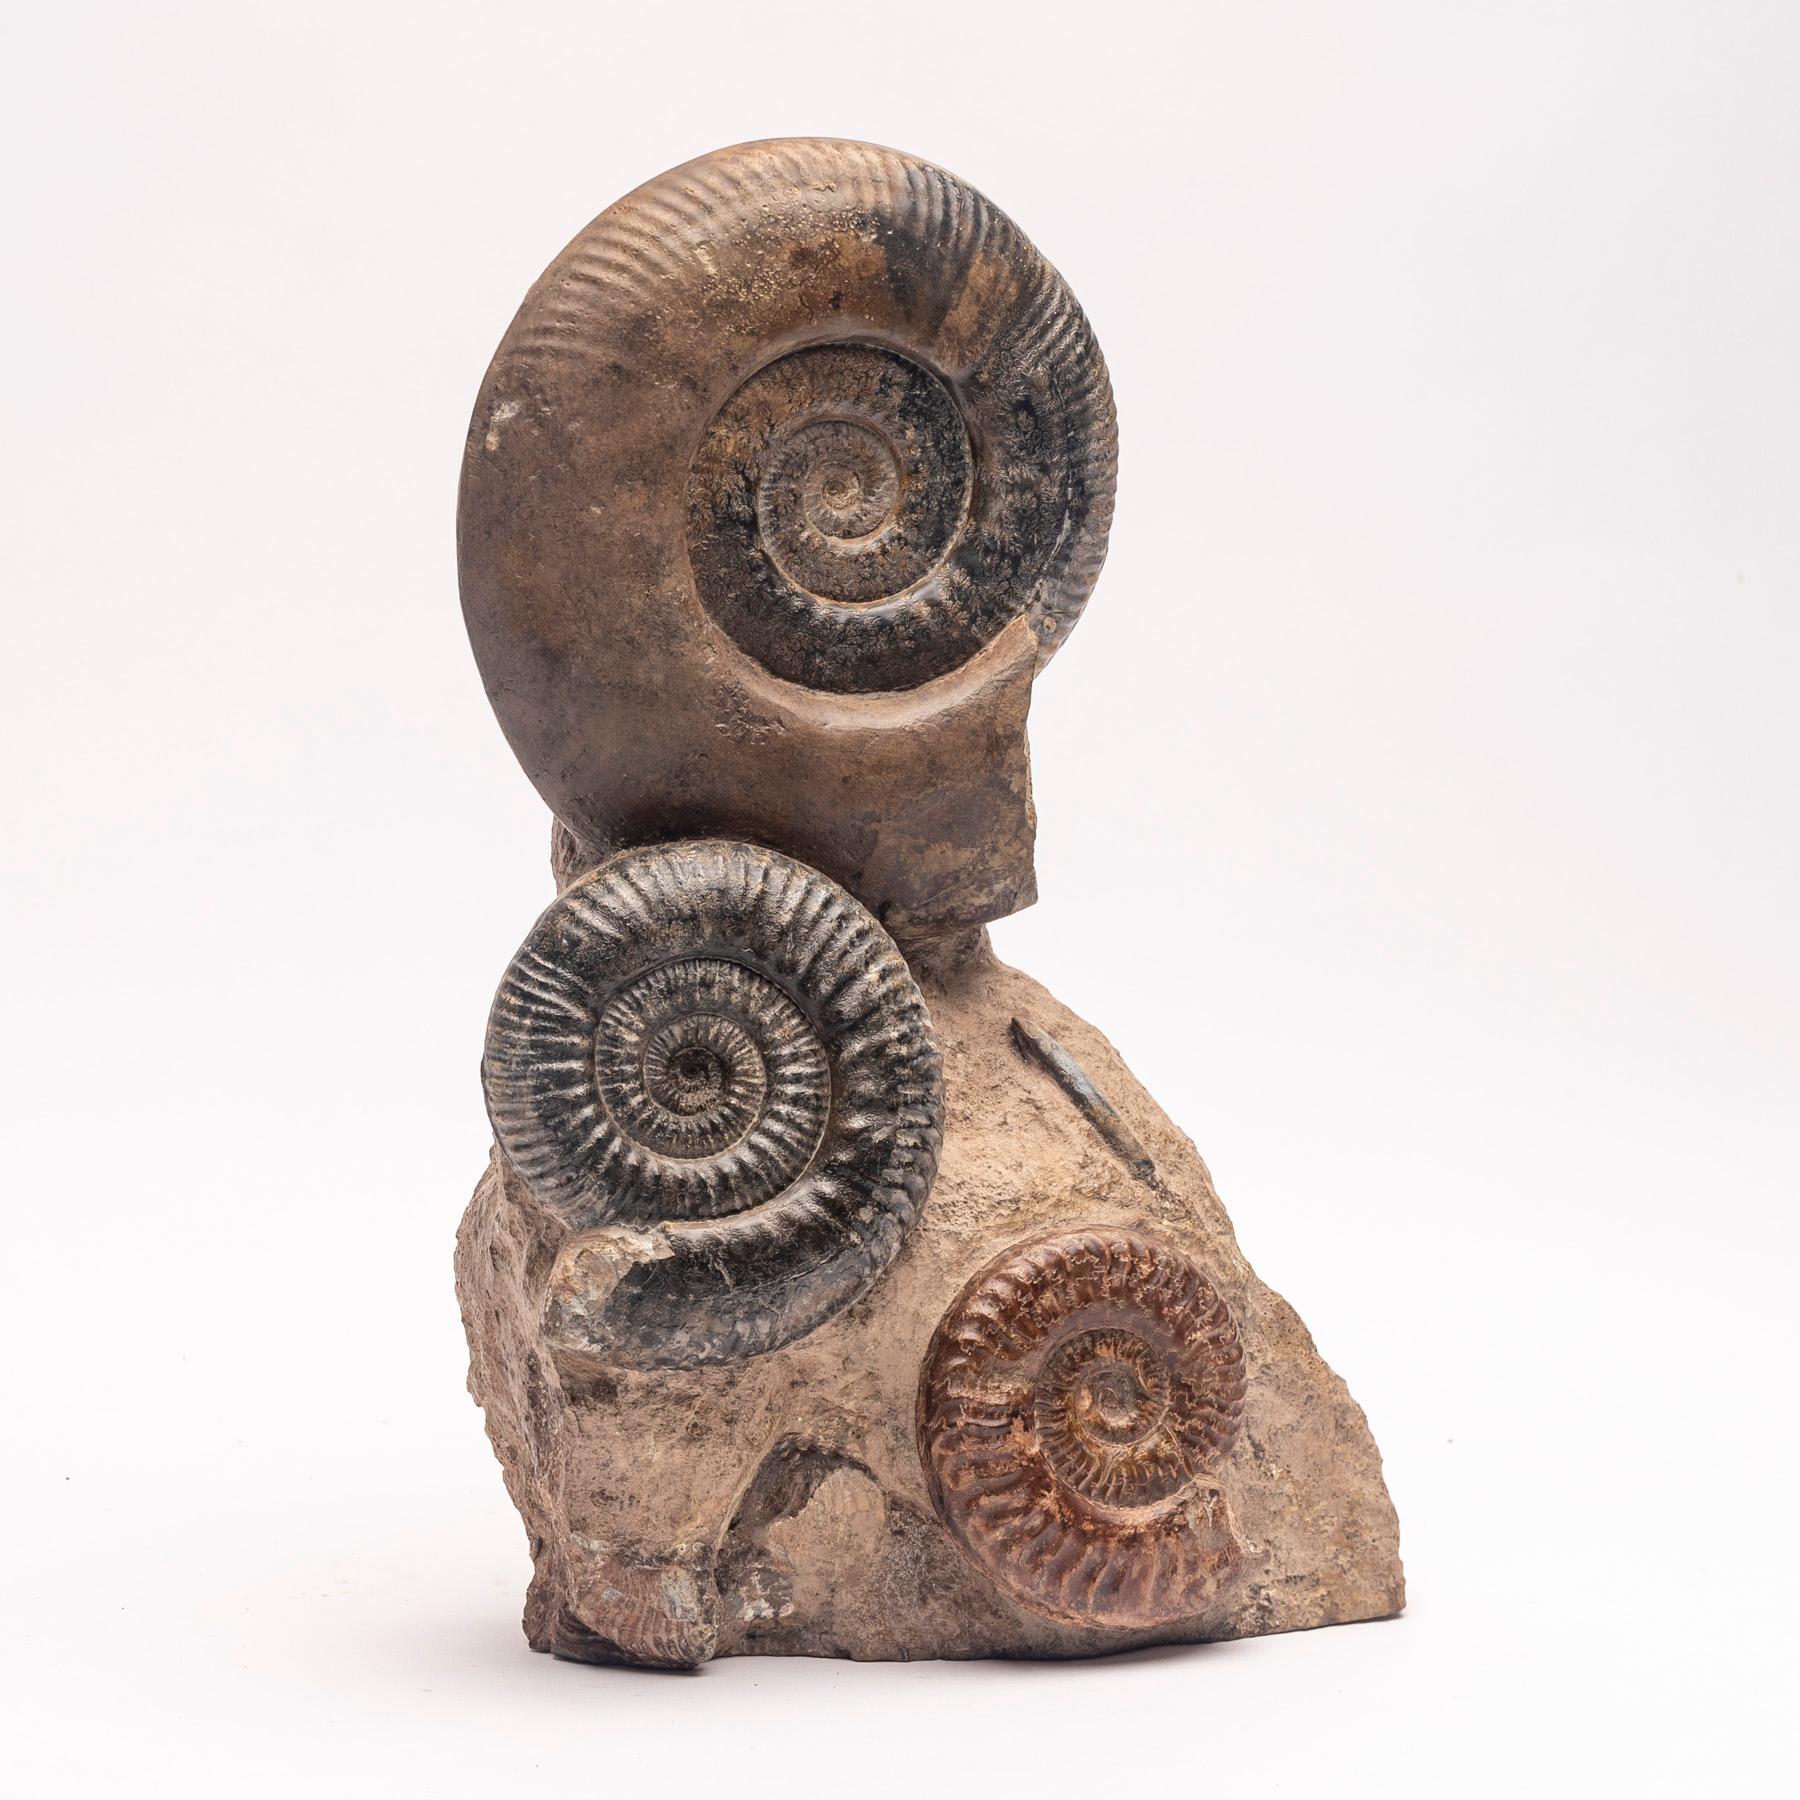 Organic Modern Free Standing Fossil Ammonite Cluster from Madagascar, Cretaceous Period